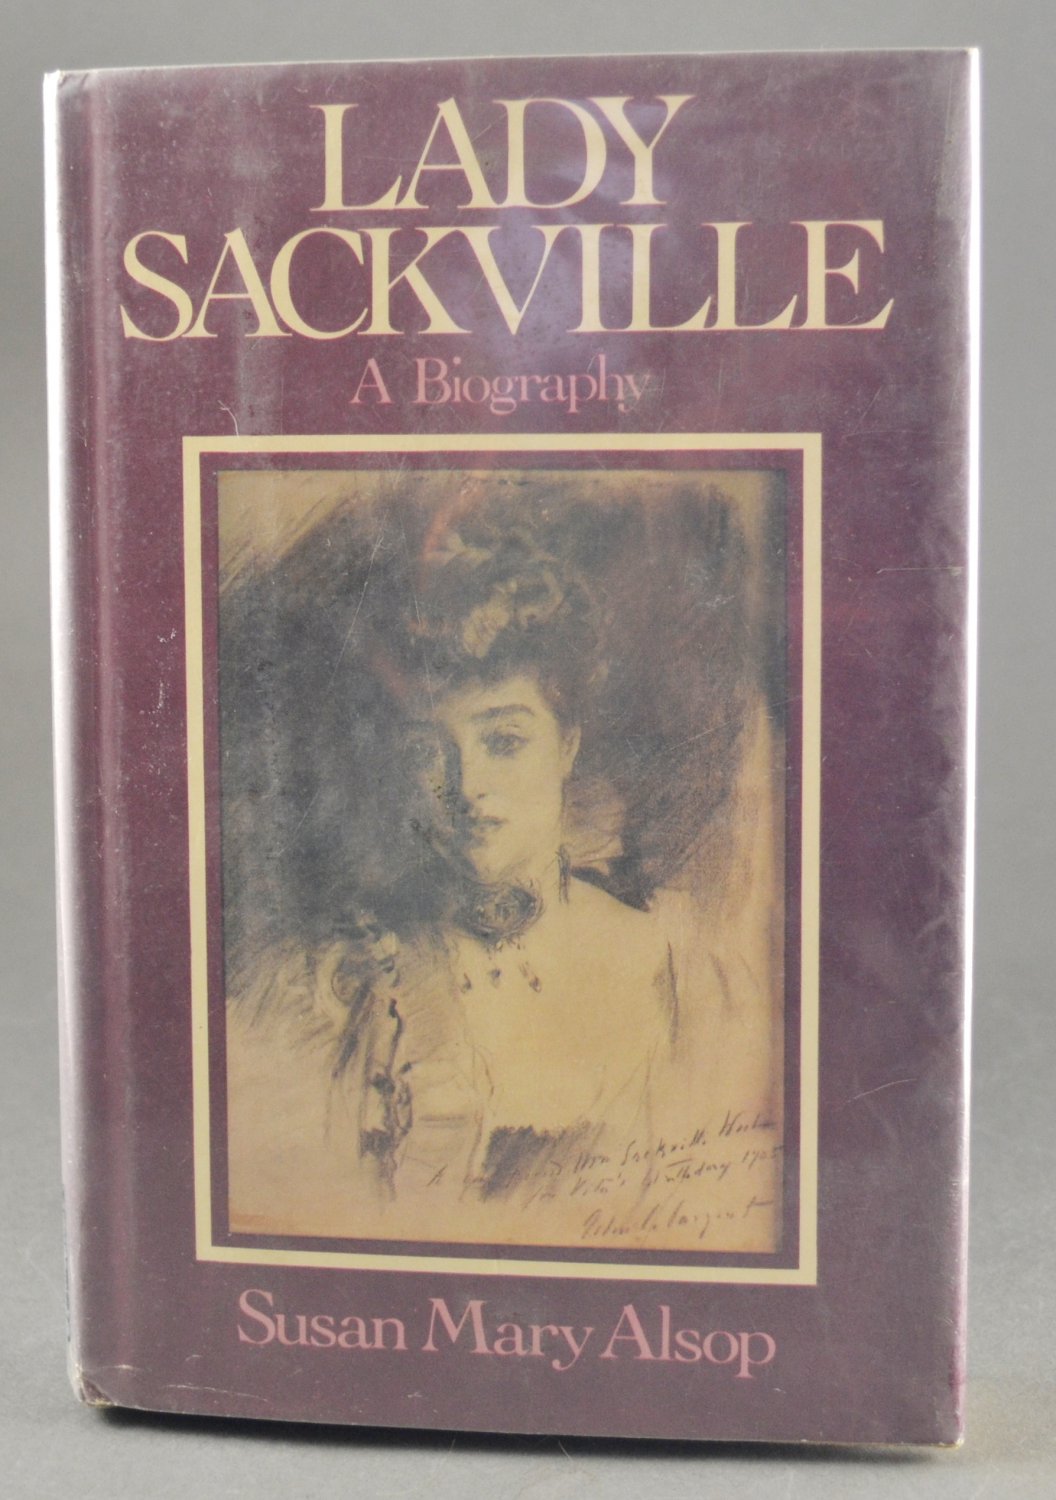 Lady Sackville A Biography by Susan Mary Alsop HB Library Copy